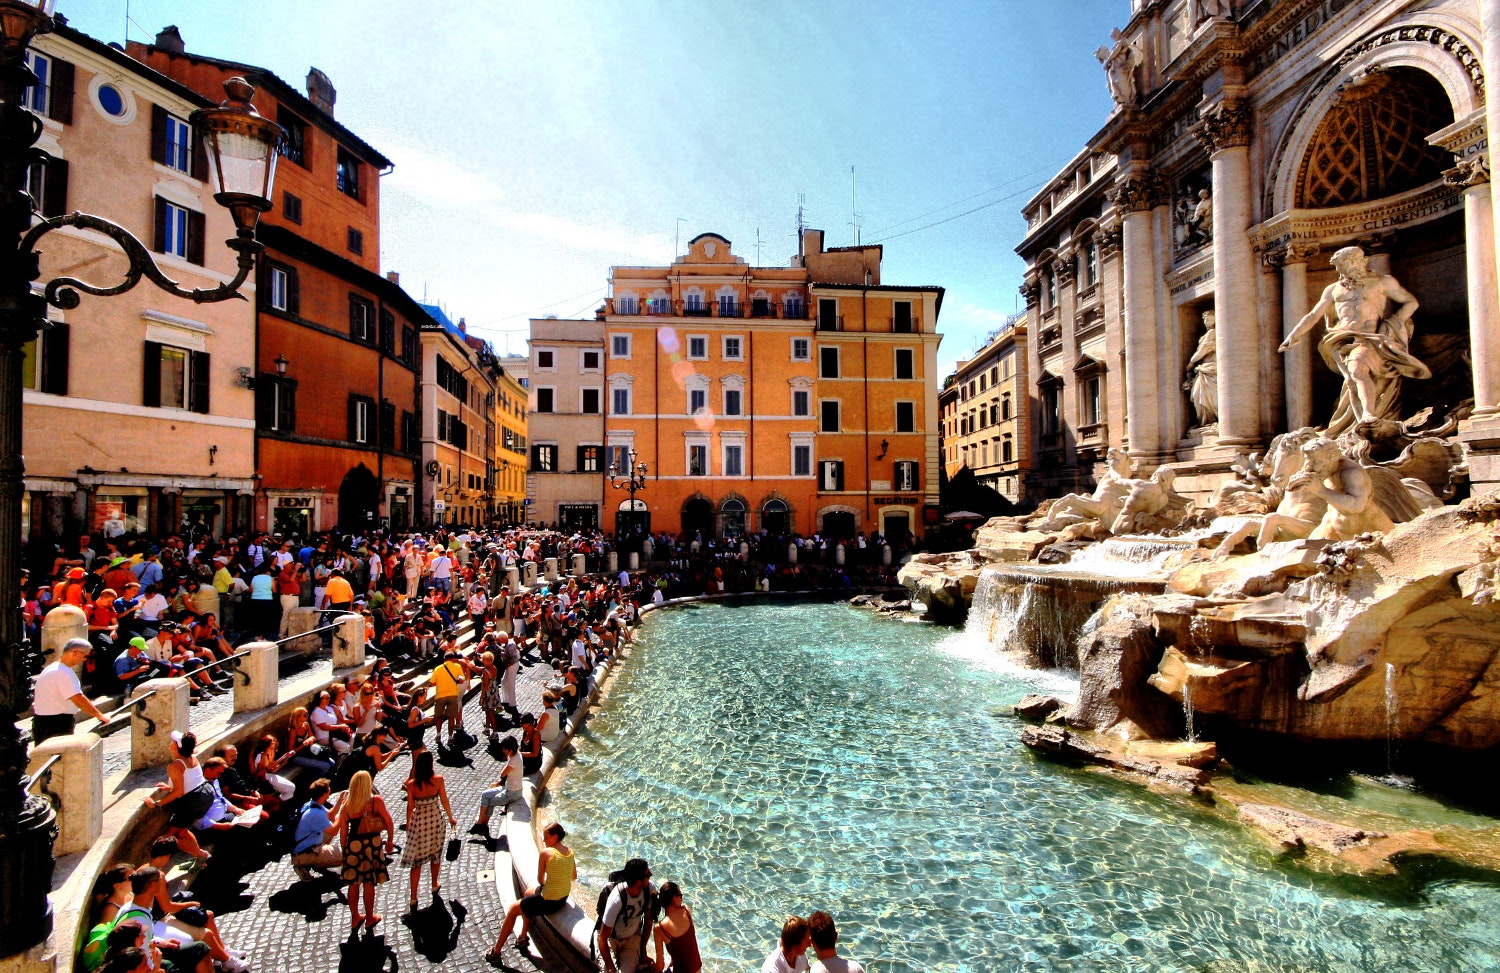 A large number of tourists take photos, throw coins and walk around Trevi Fountain in Rome.